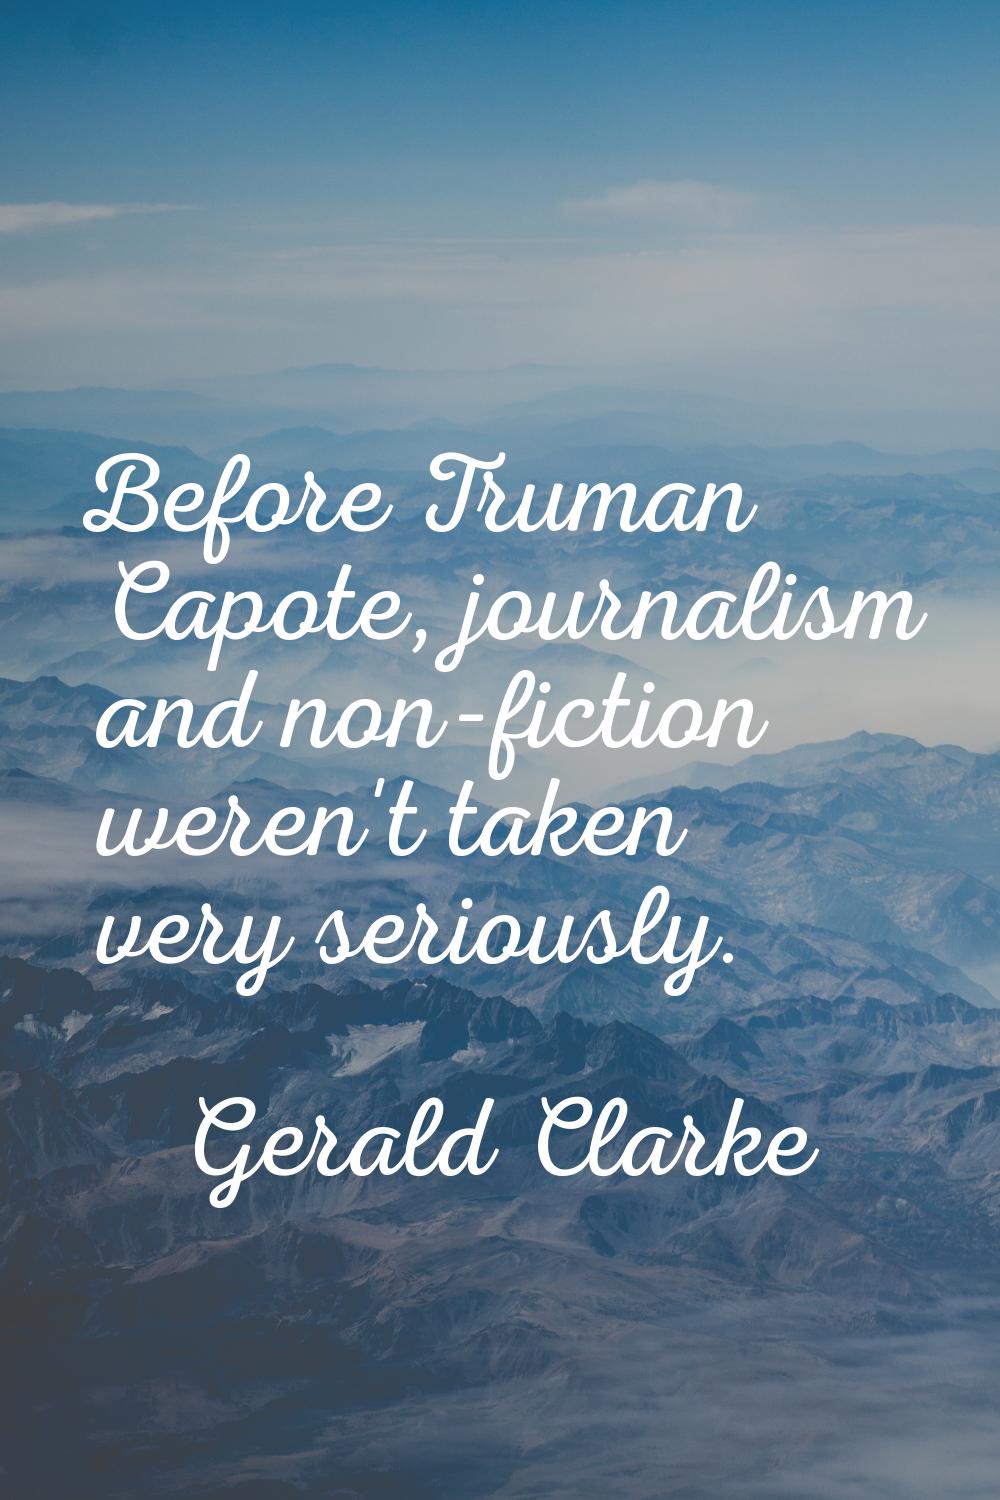 Before Truman Capote, journalism and non-fiction weren't taken very seriously.